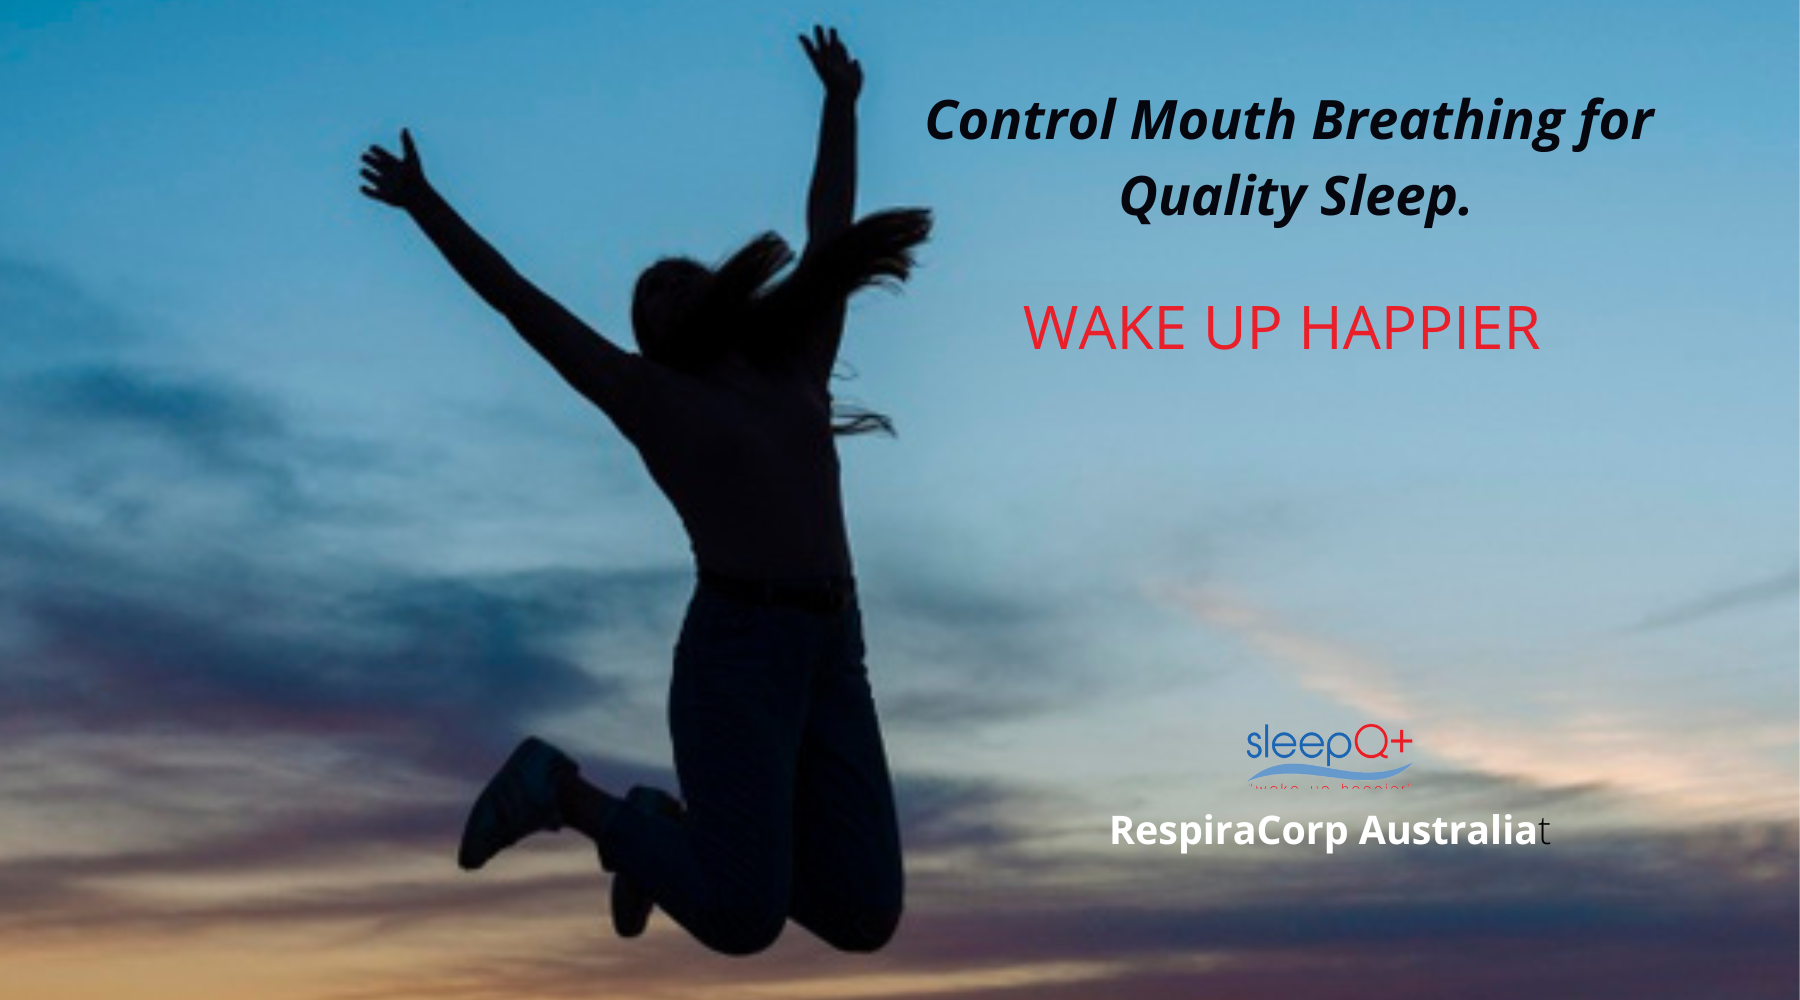 Why mouth breathing at night reduces your sleep quality?